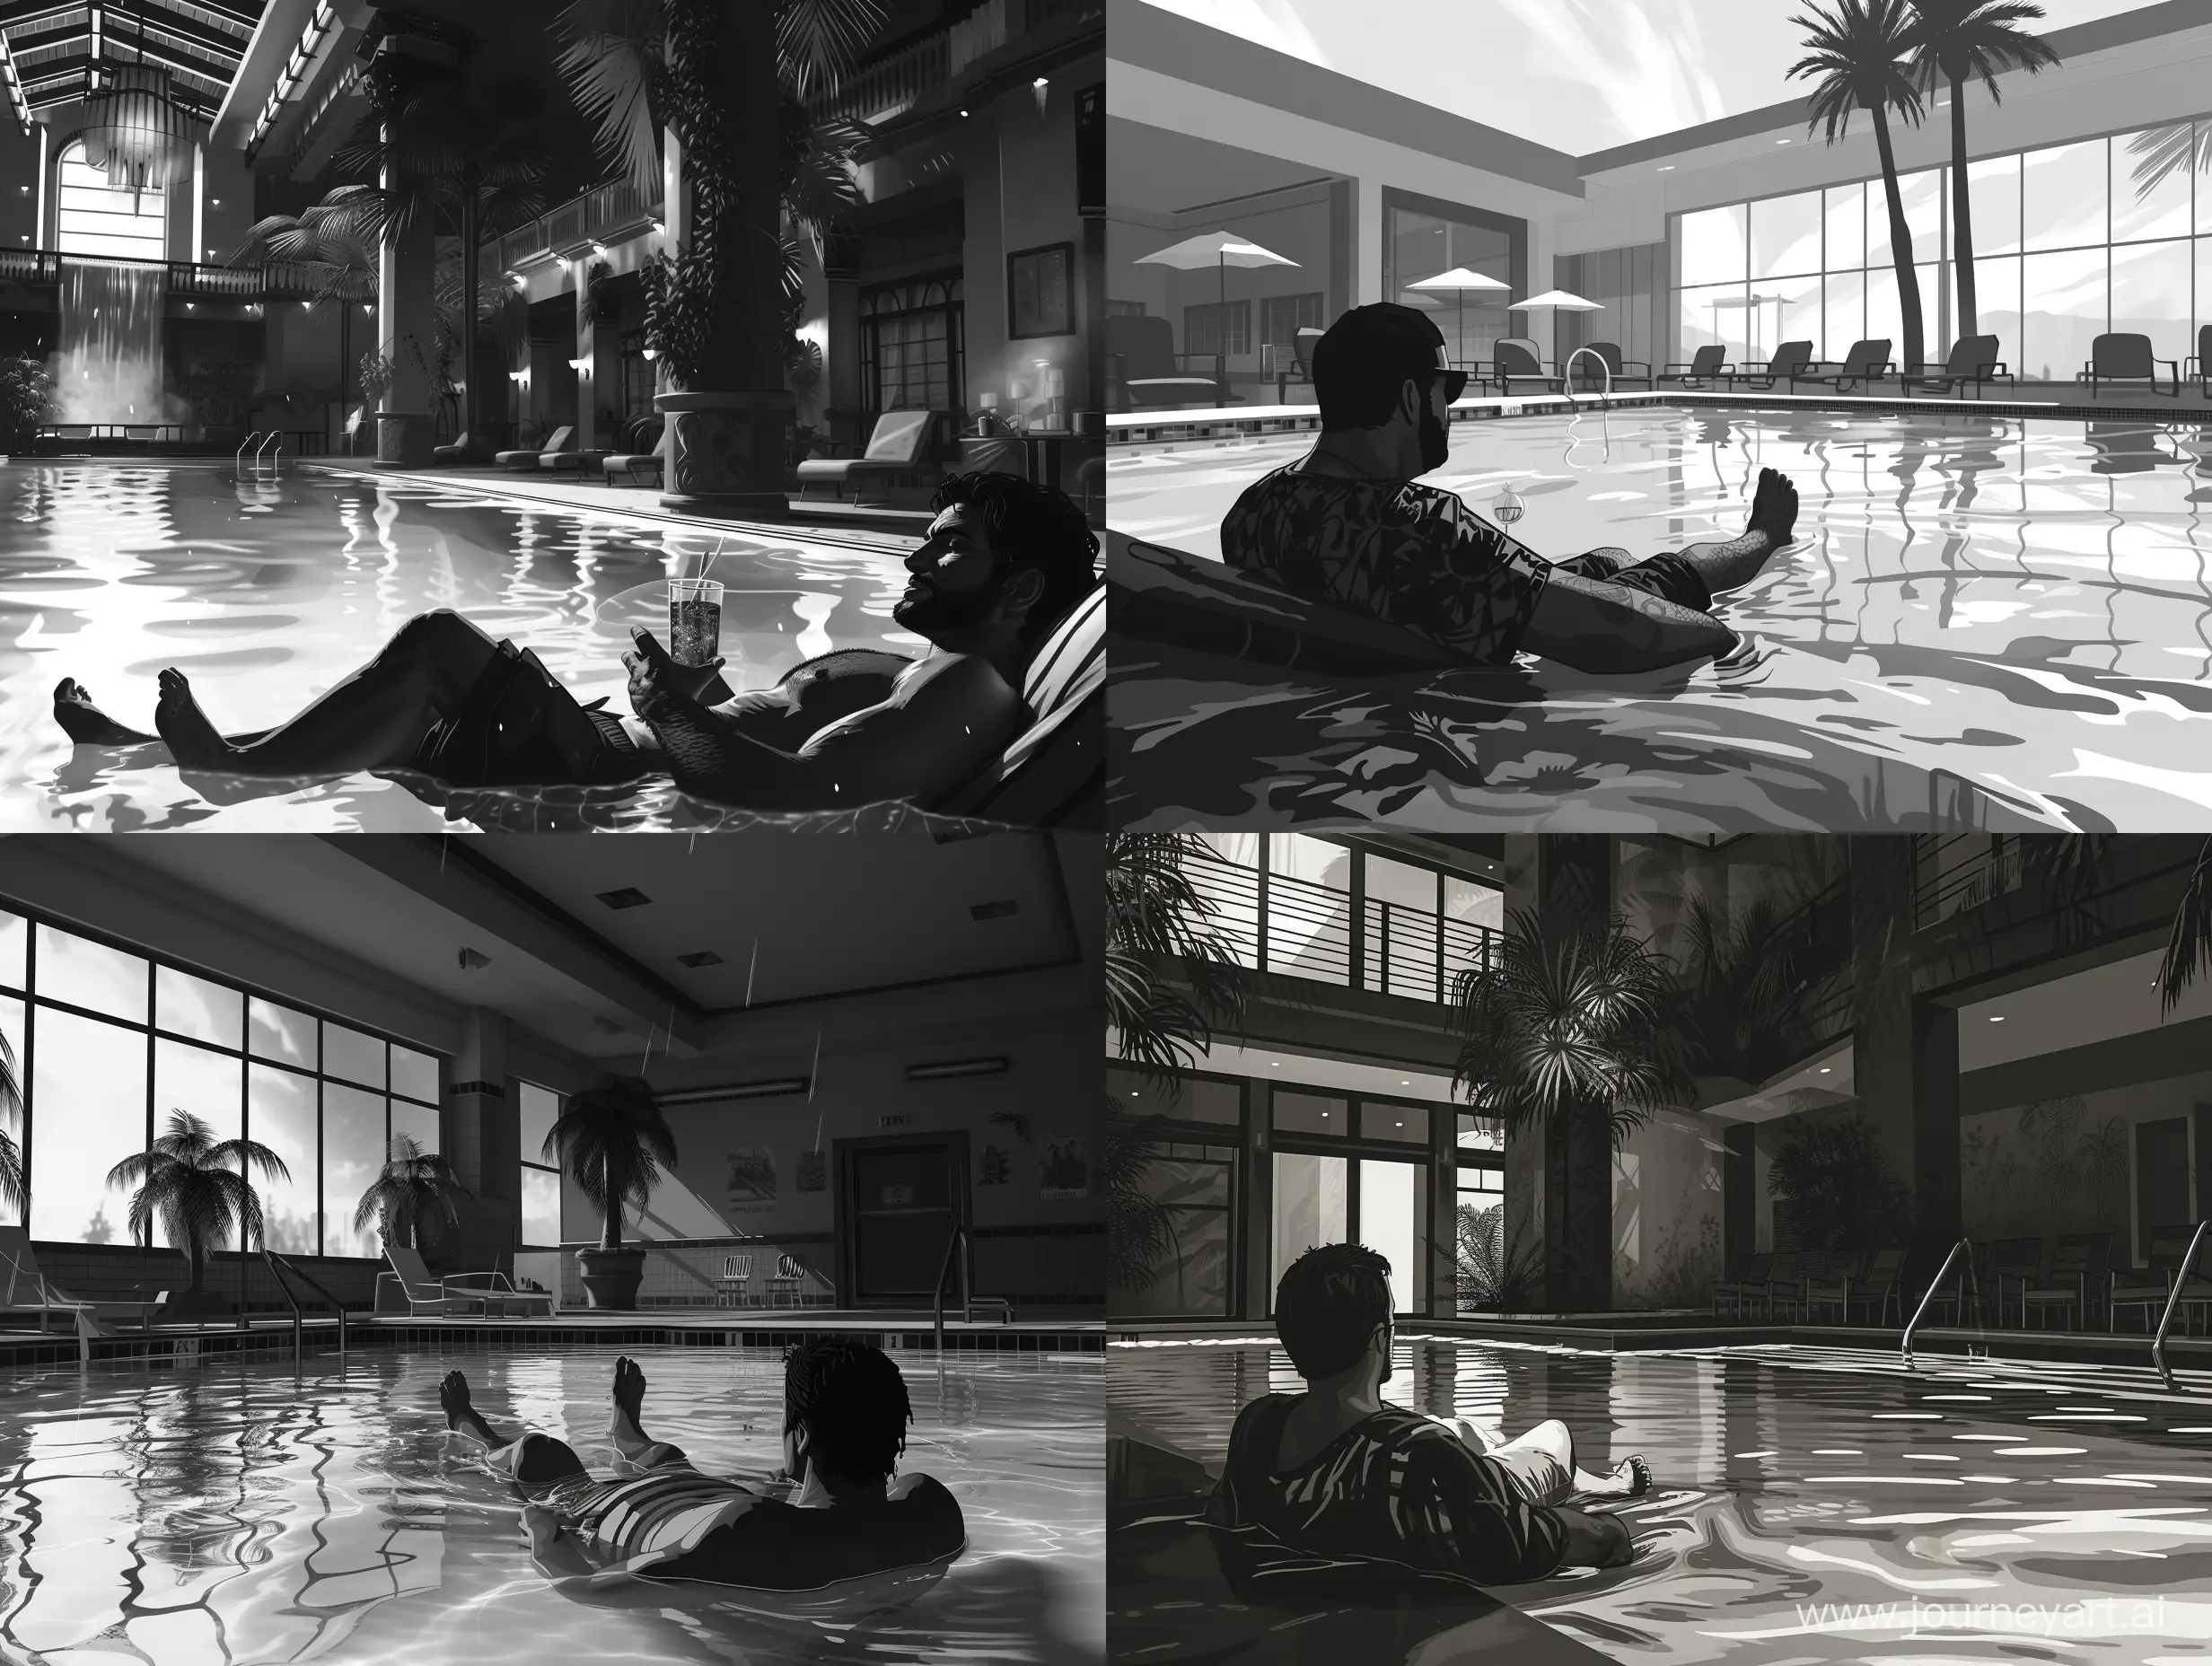 man relaxing in swimming pool, hotel interior, grand theft auto artstyle, loading screen, celshading, highly detailed, black and white only.